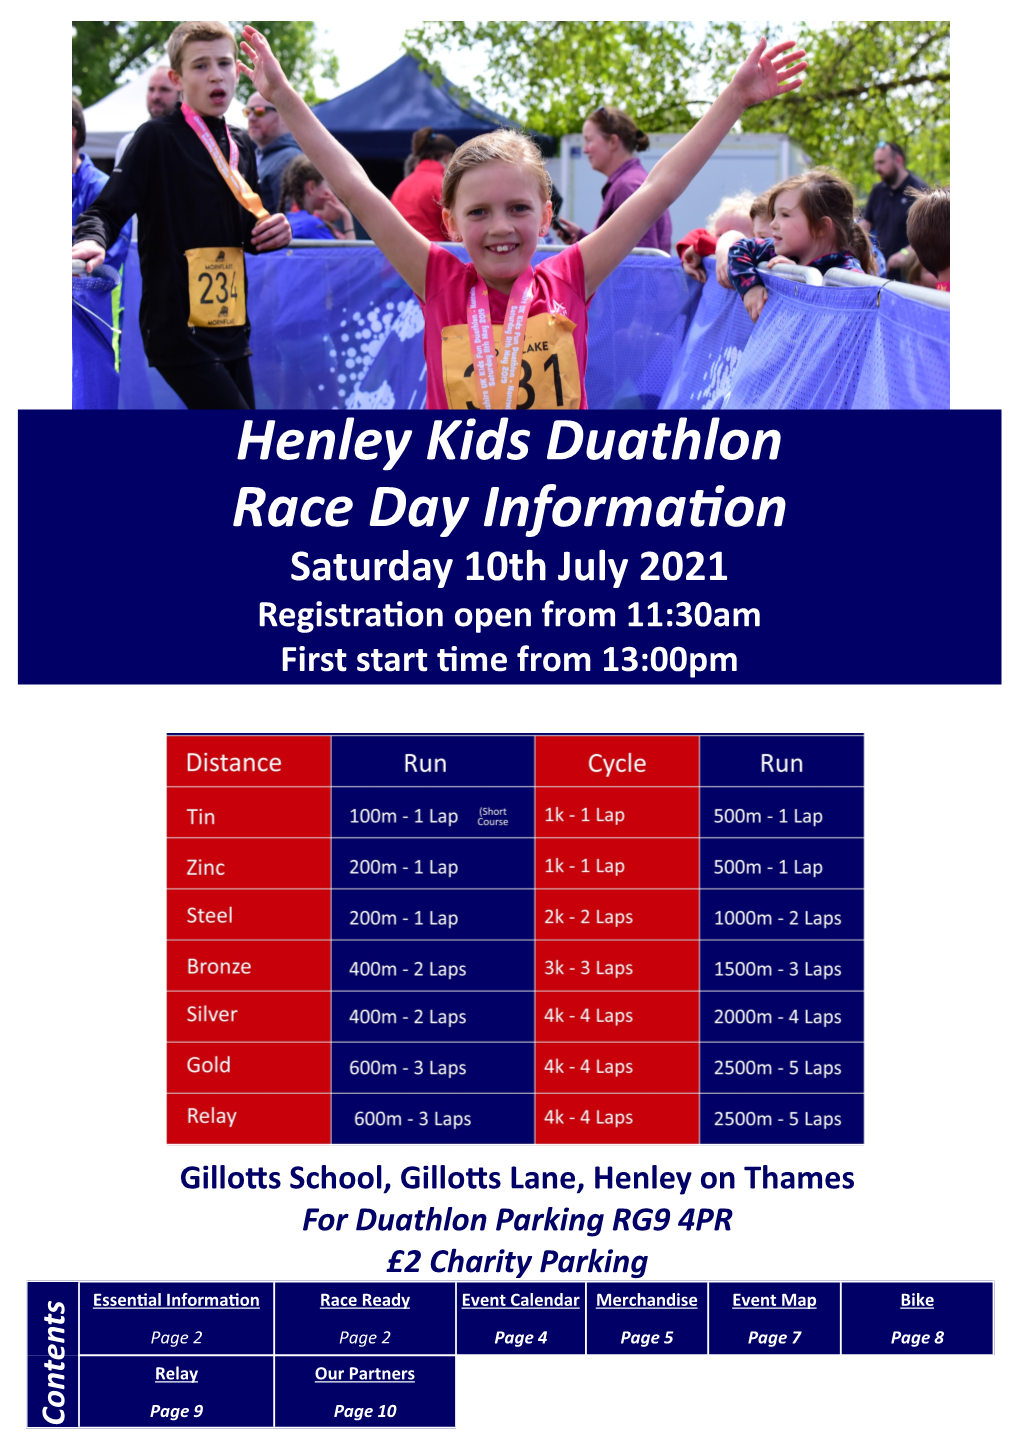 Henley Kids Duathlon Race Day Information Saturday 10Th July 2021 Registration Open from 11:30Am First Start Time from 13:00Pm